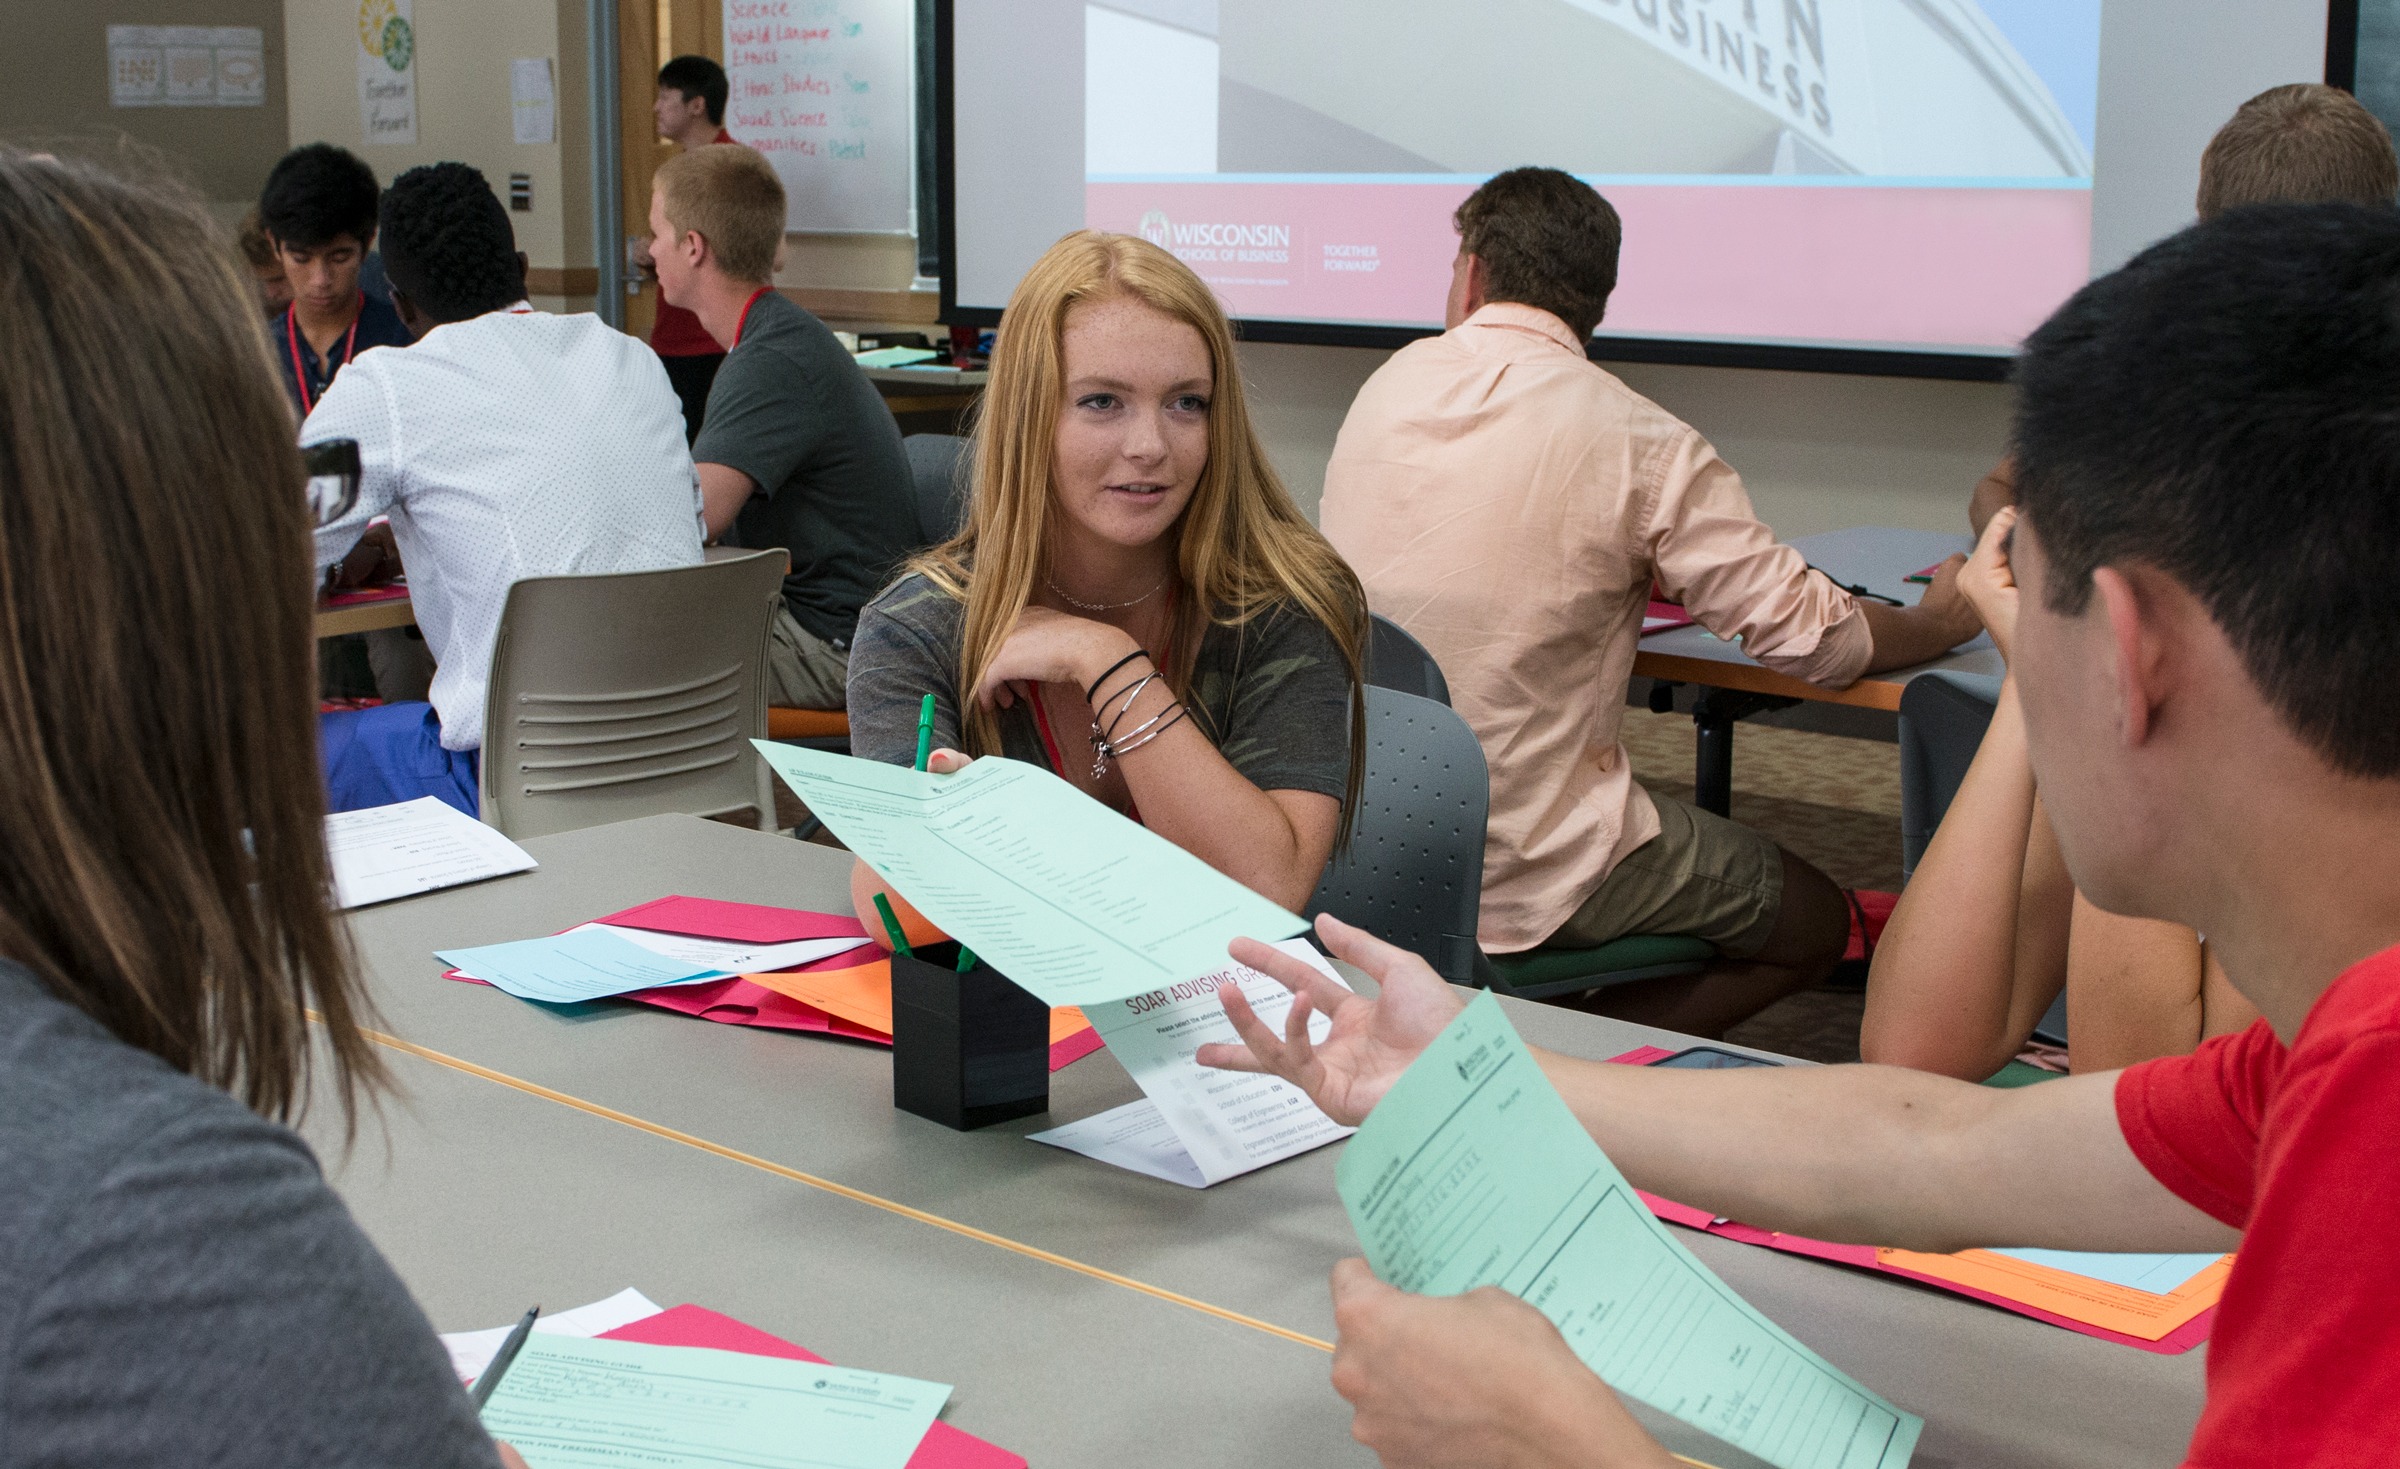 A woman handing out papers to students sitting at a table